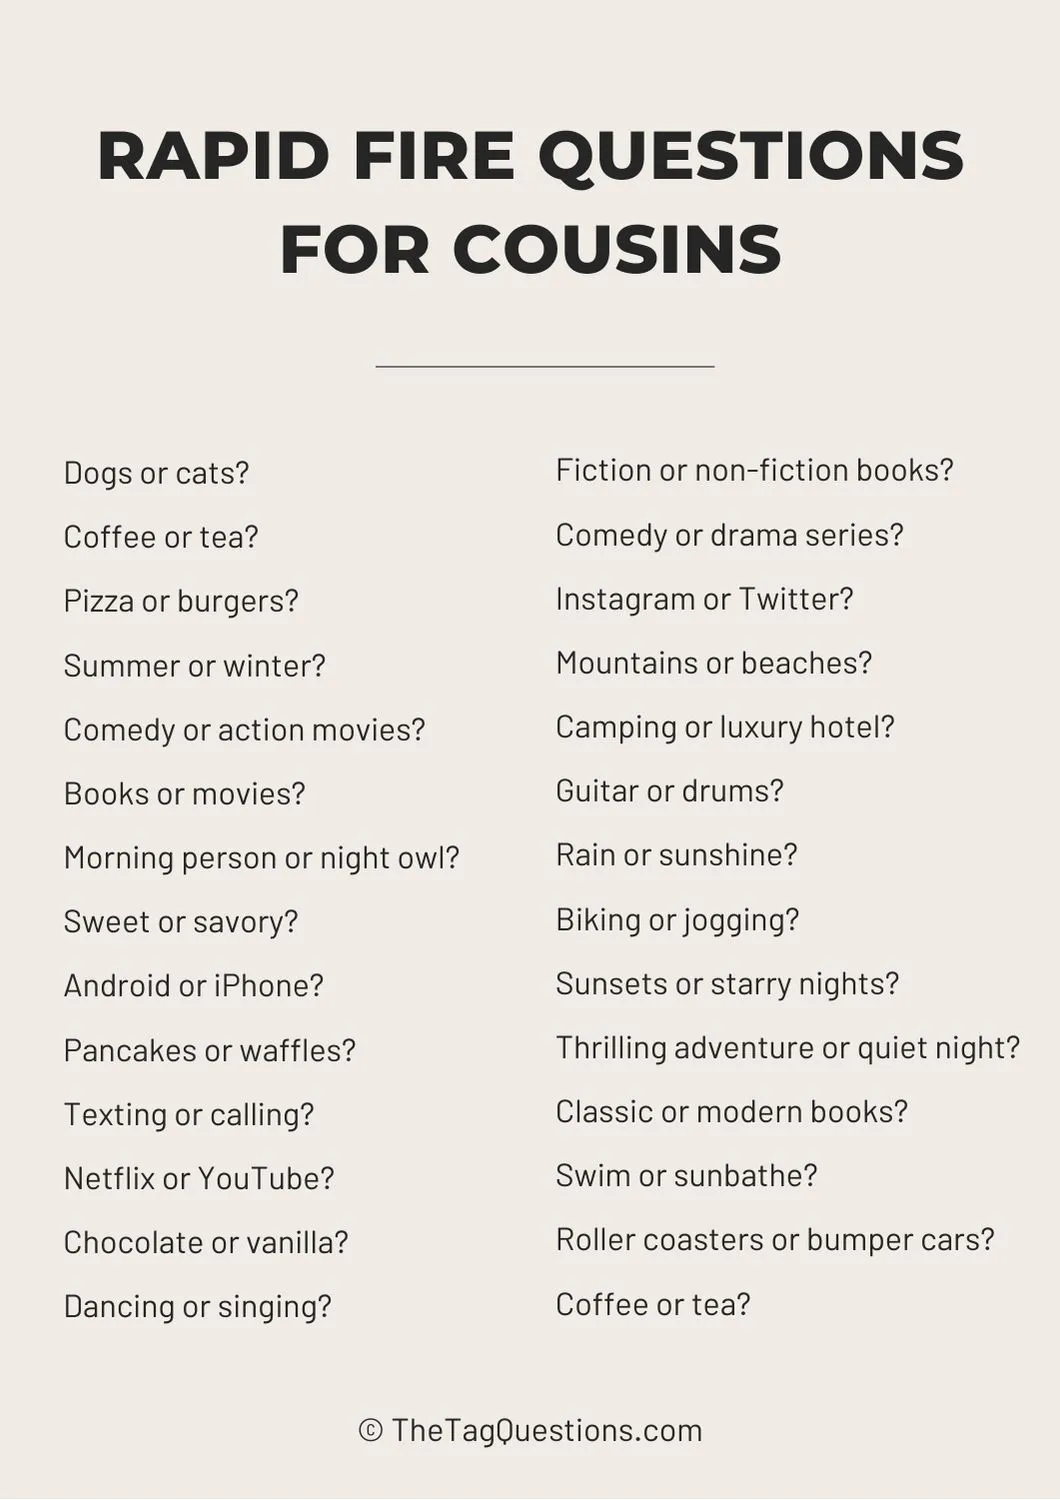 Rapid fire questions to ask your cousins